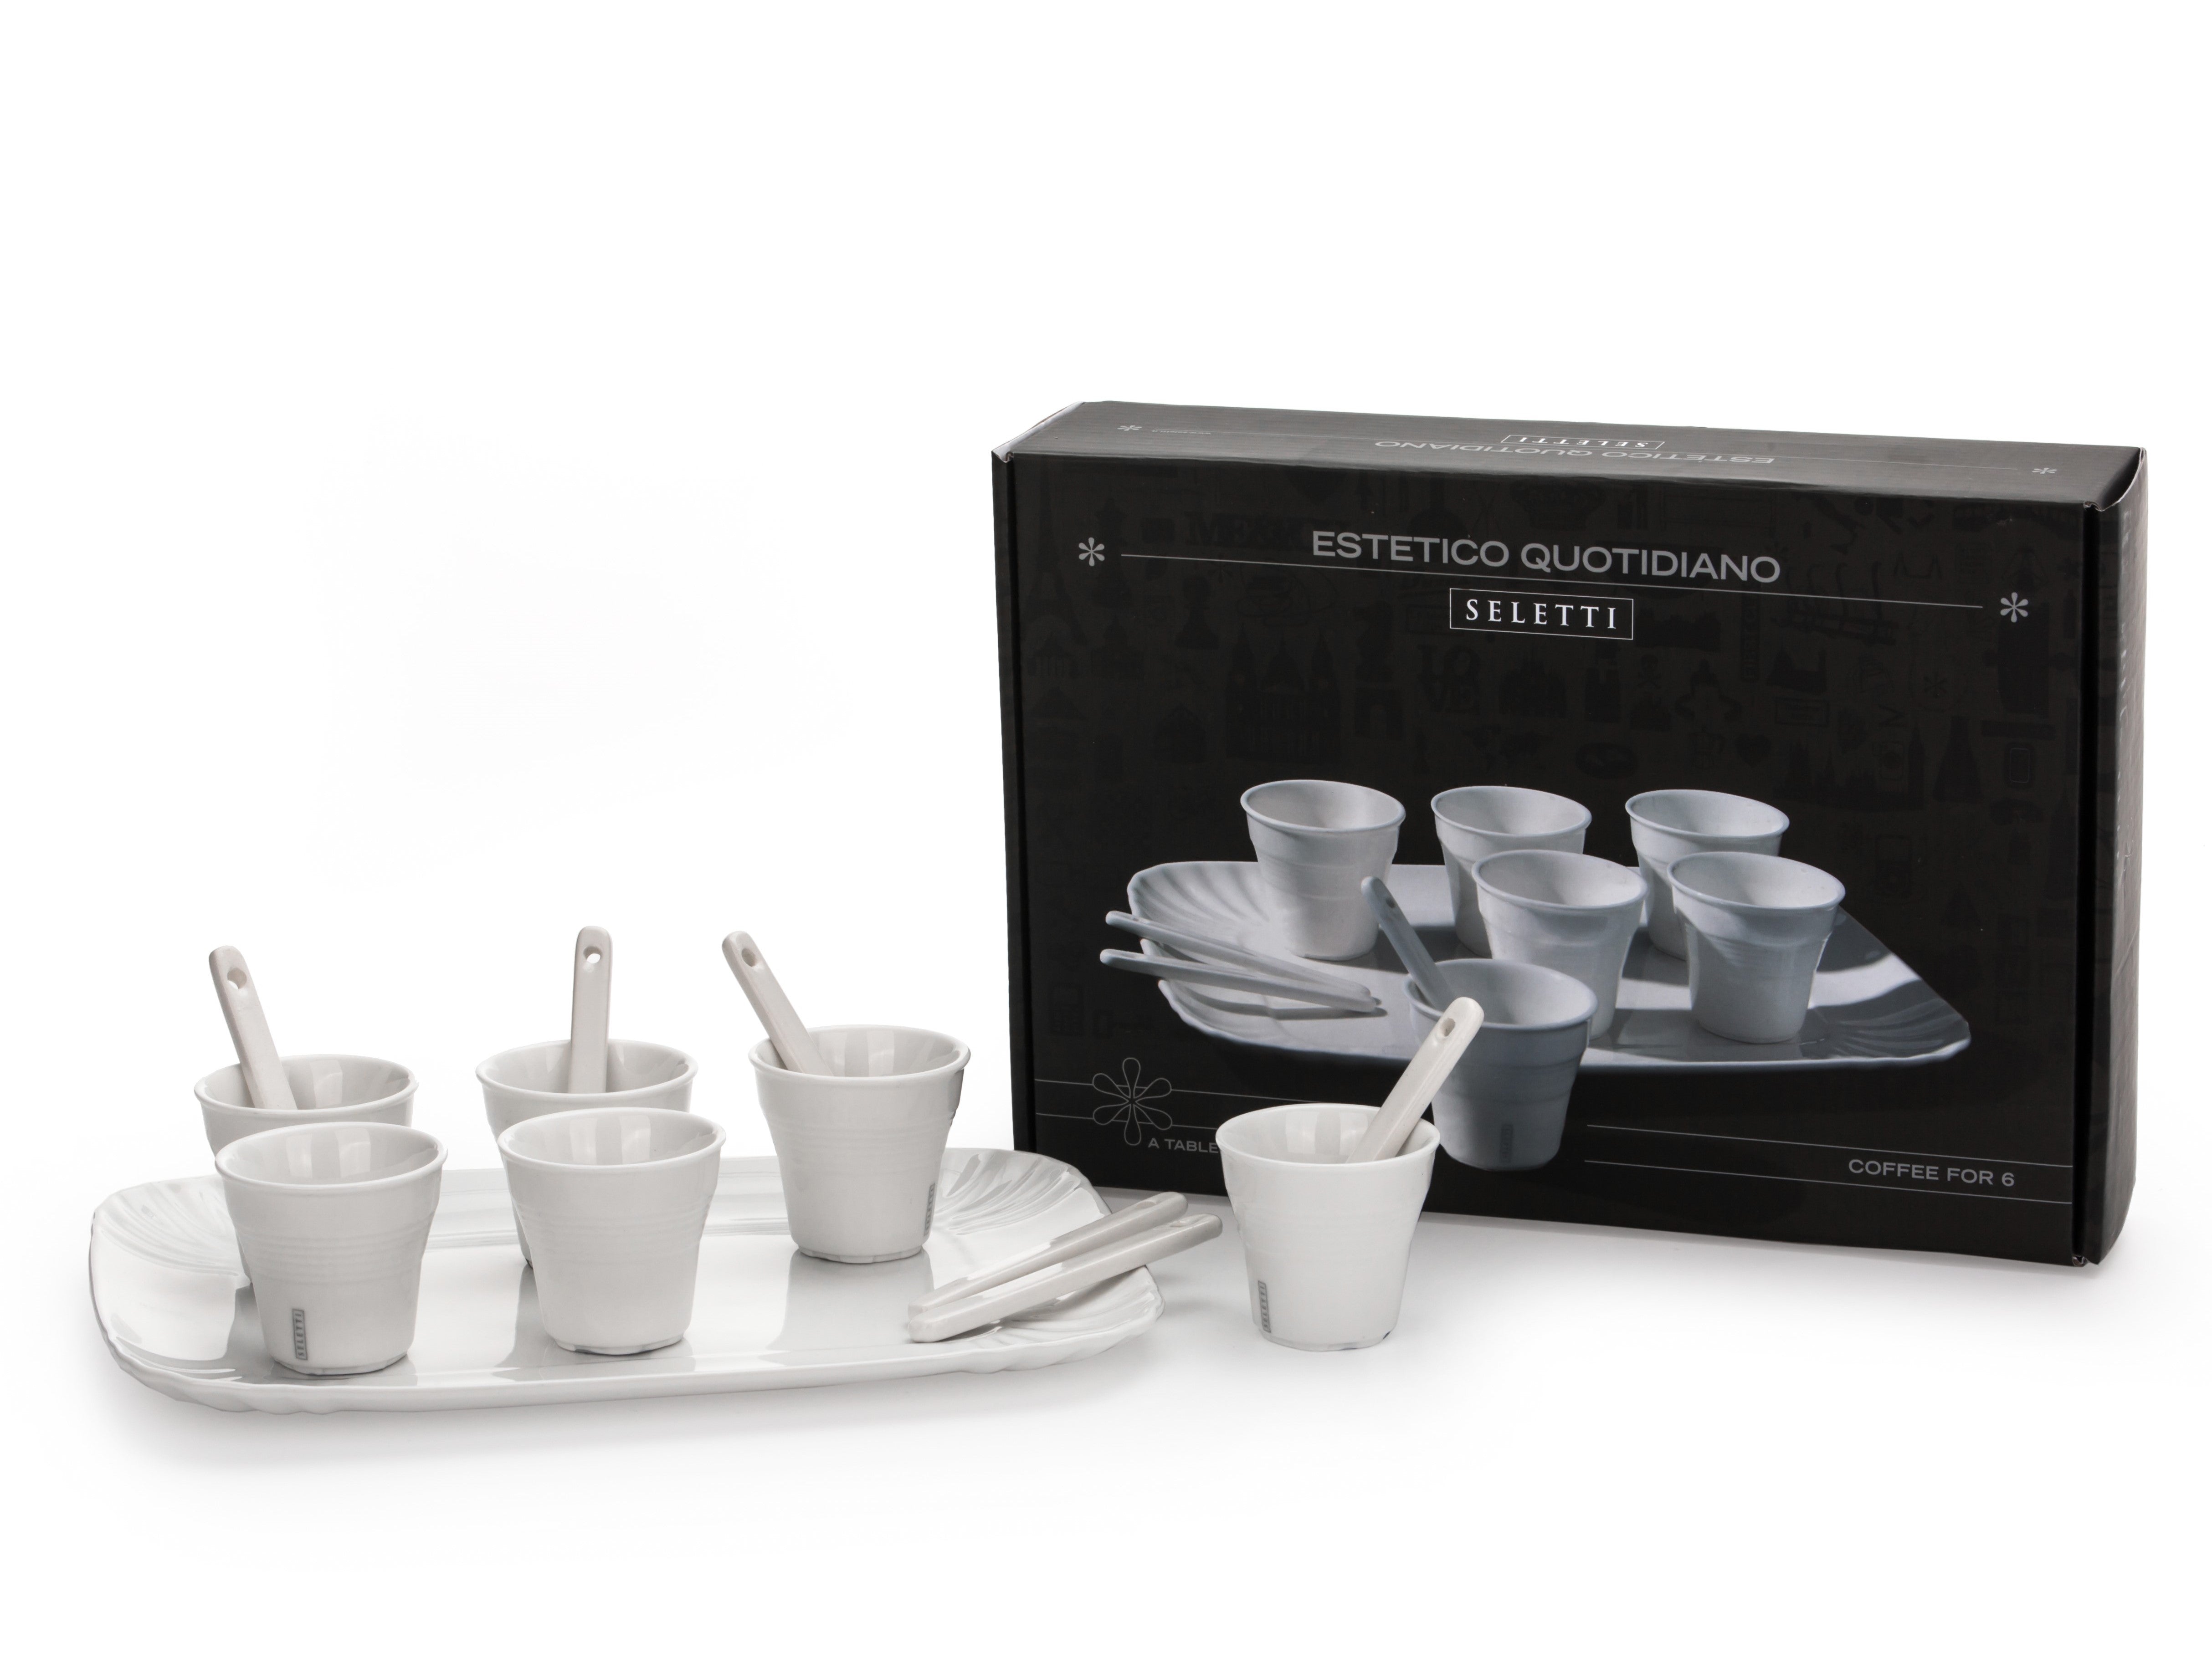 Seletti Estetico Quotidiano Set of 6 Coffee Cups, 6 Spoons and Porcelain Tray